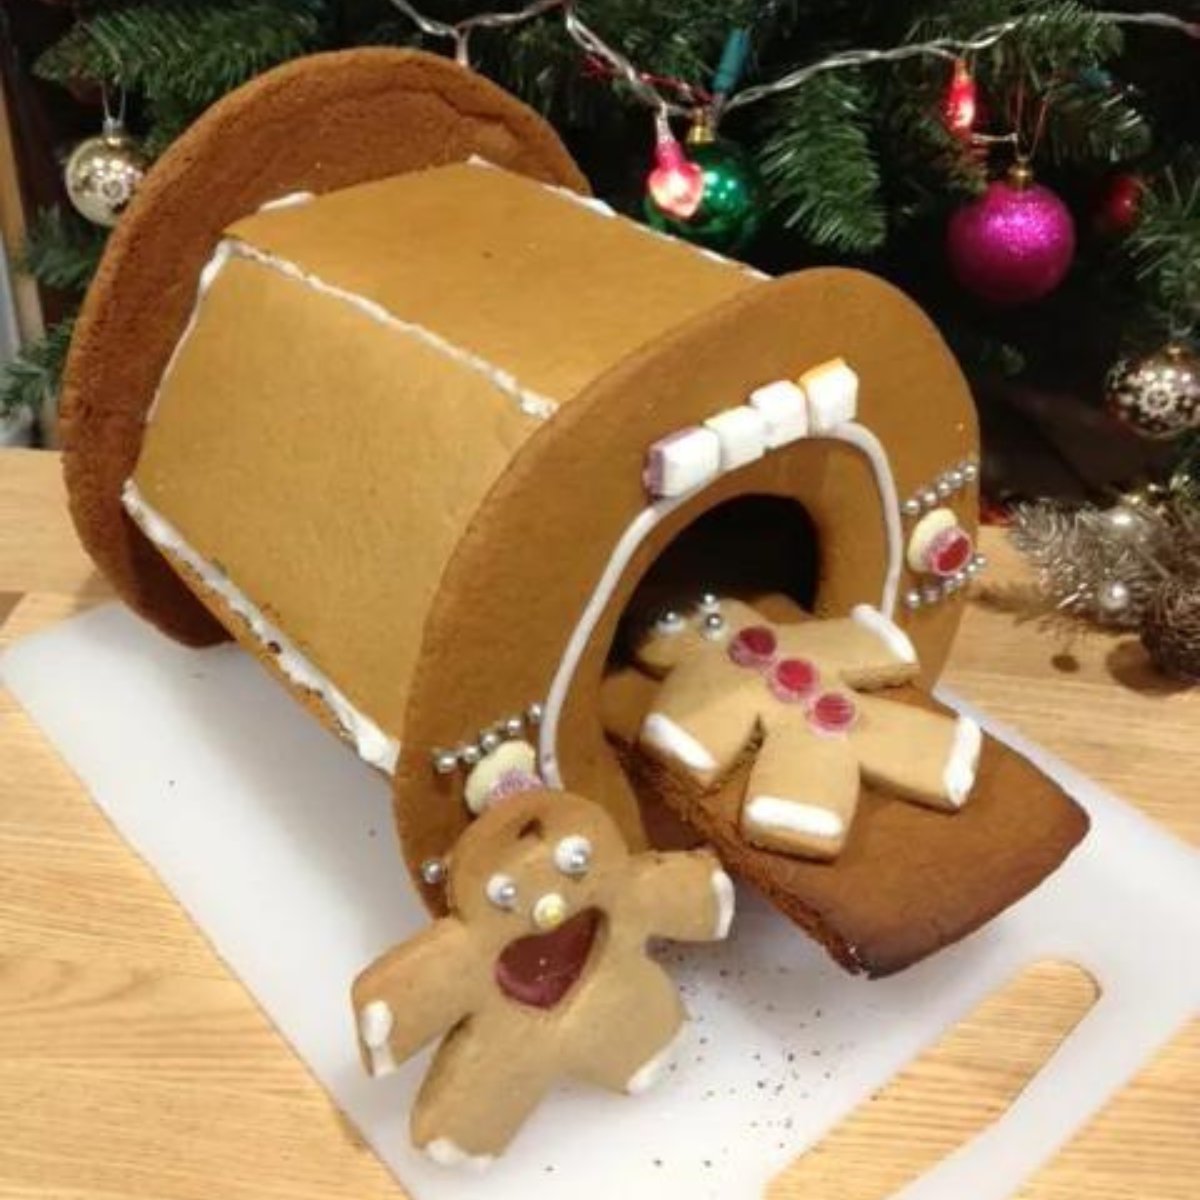 The world’s first gingerbread MRI scanner is here! Created by the students at the Oxford Centre for Functional MRI of the Brain (FMRIB) some years ago. Wishing you a very happy holiday season from the ACPSEM family to yours! #MRI #HappyHolidays